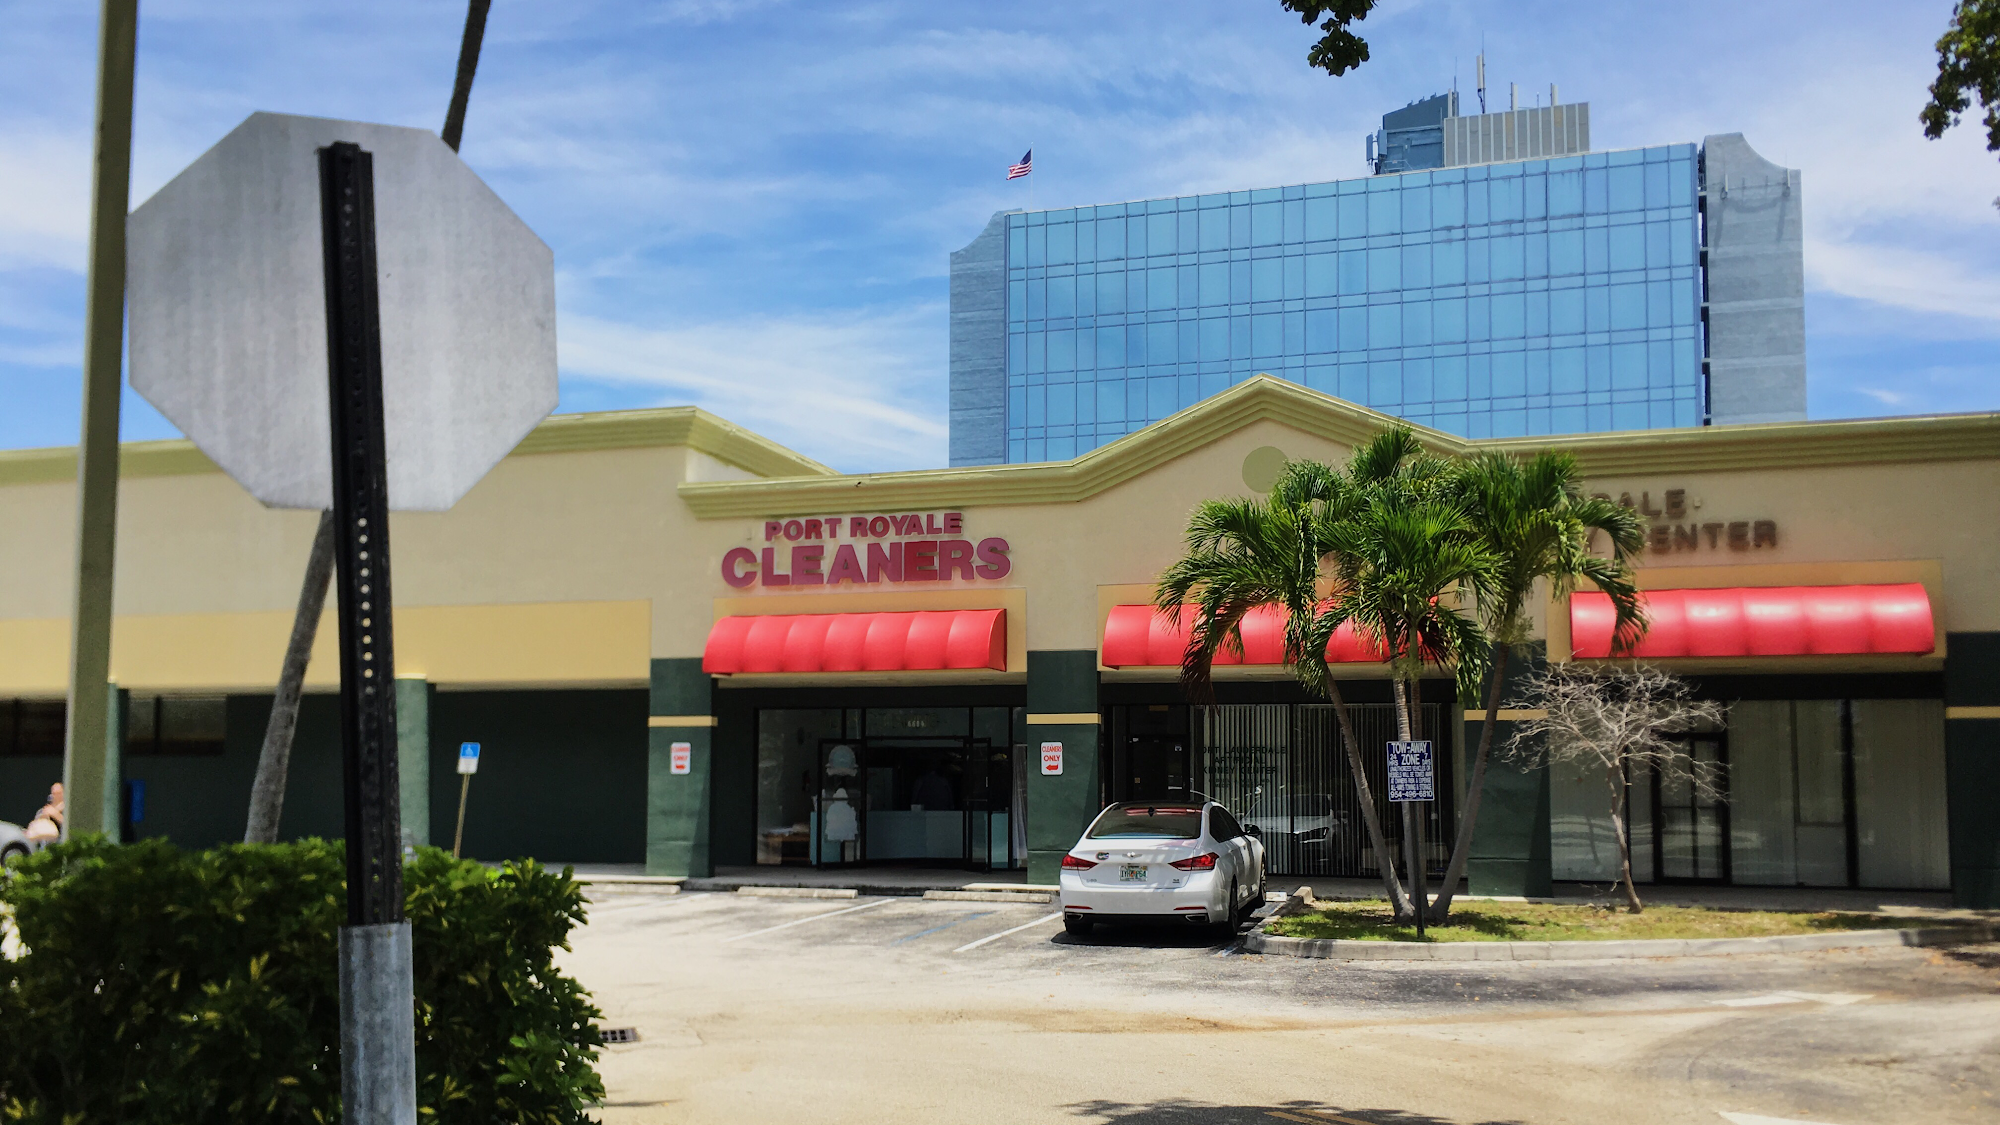 Port Royal Cleaners